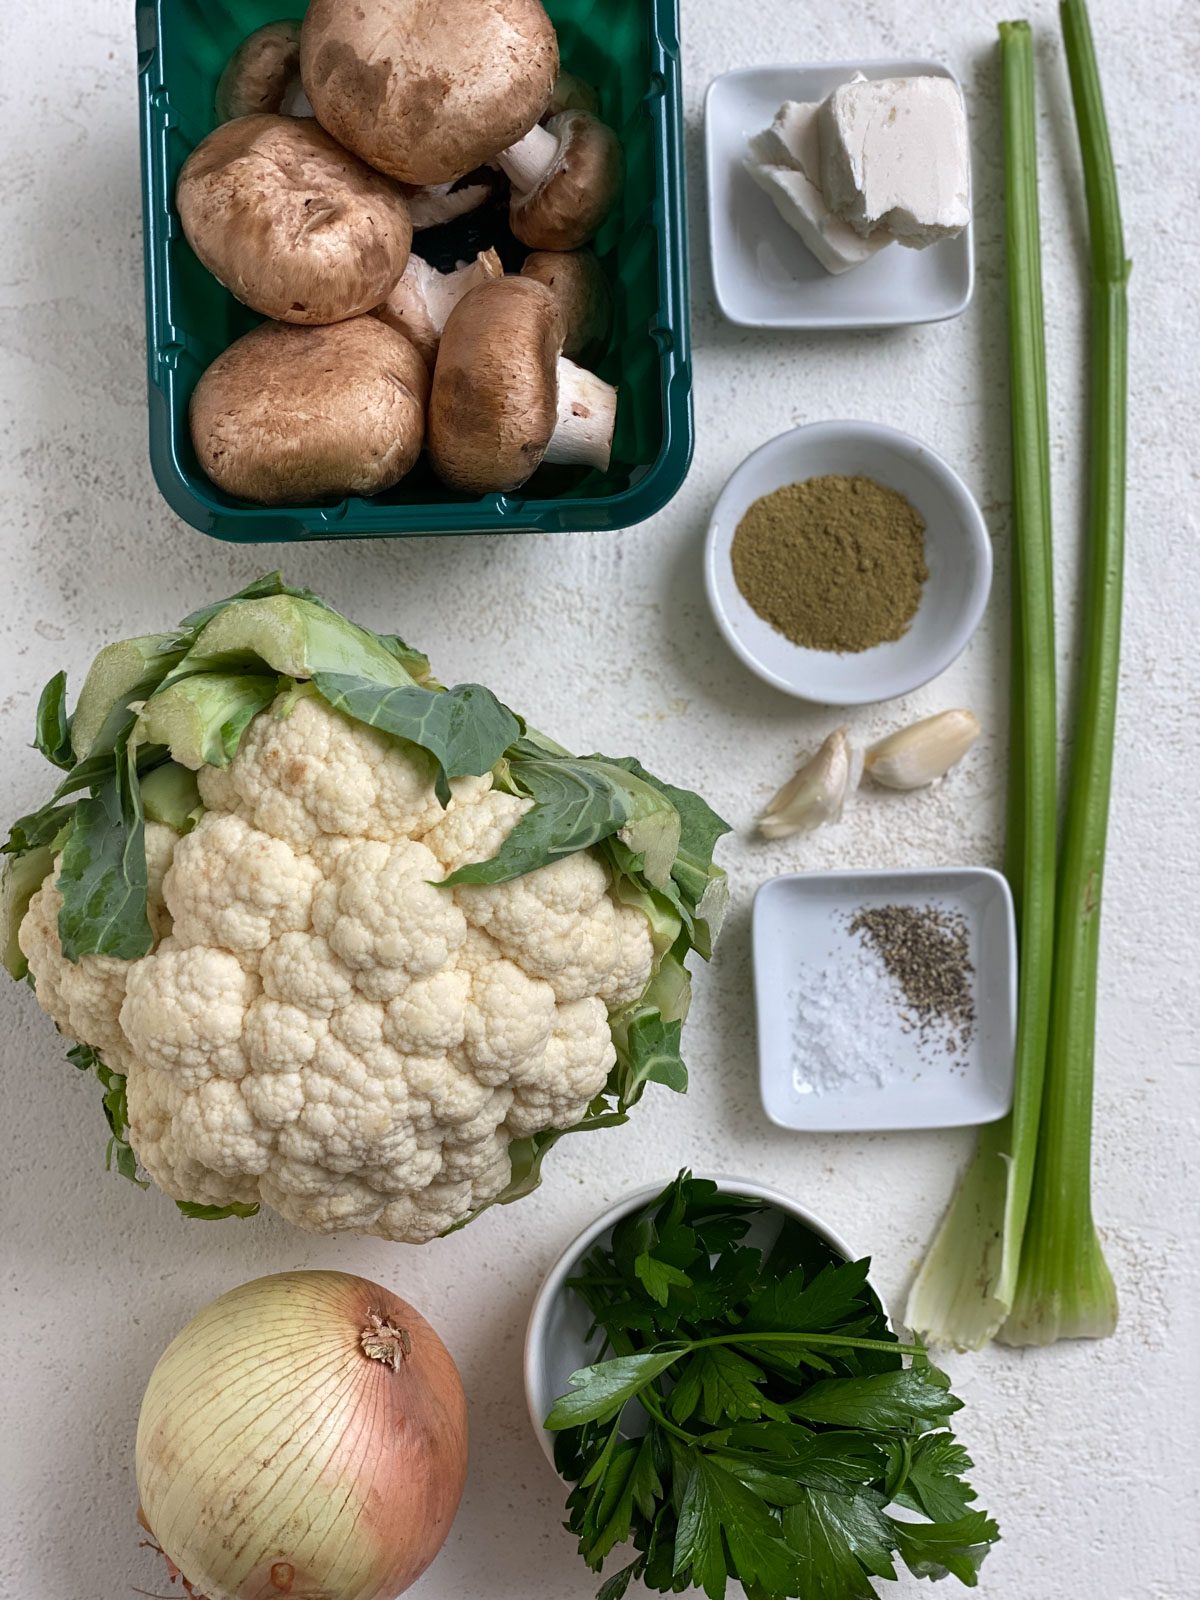 ingredients for Vegan Cauliflower Stuffing measured out against a white surface